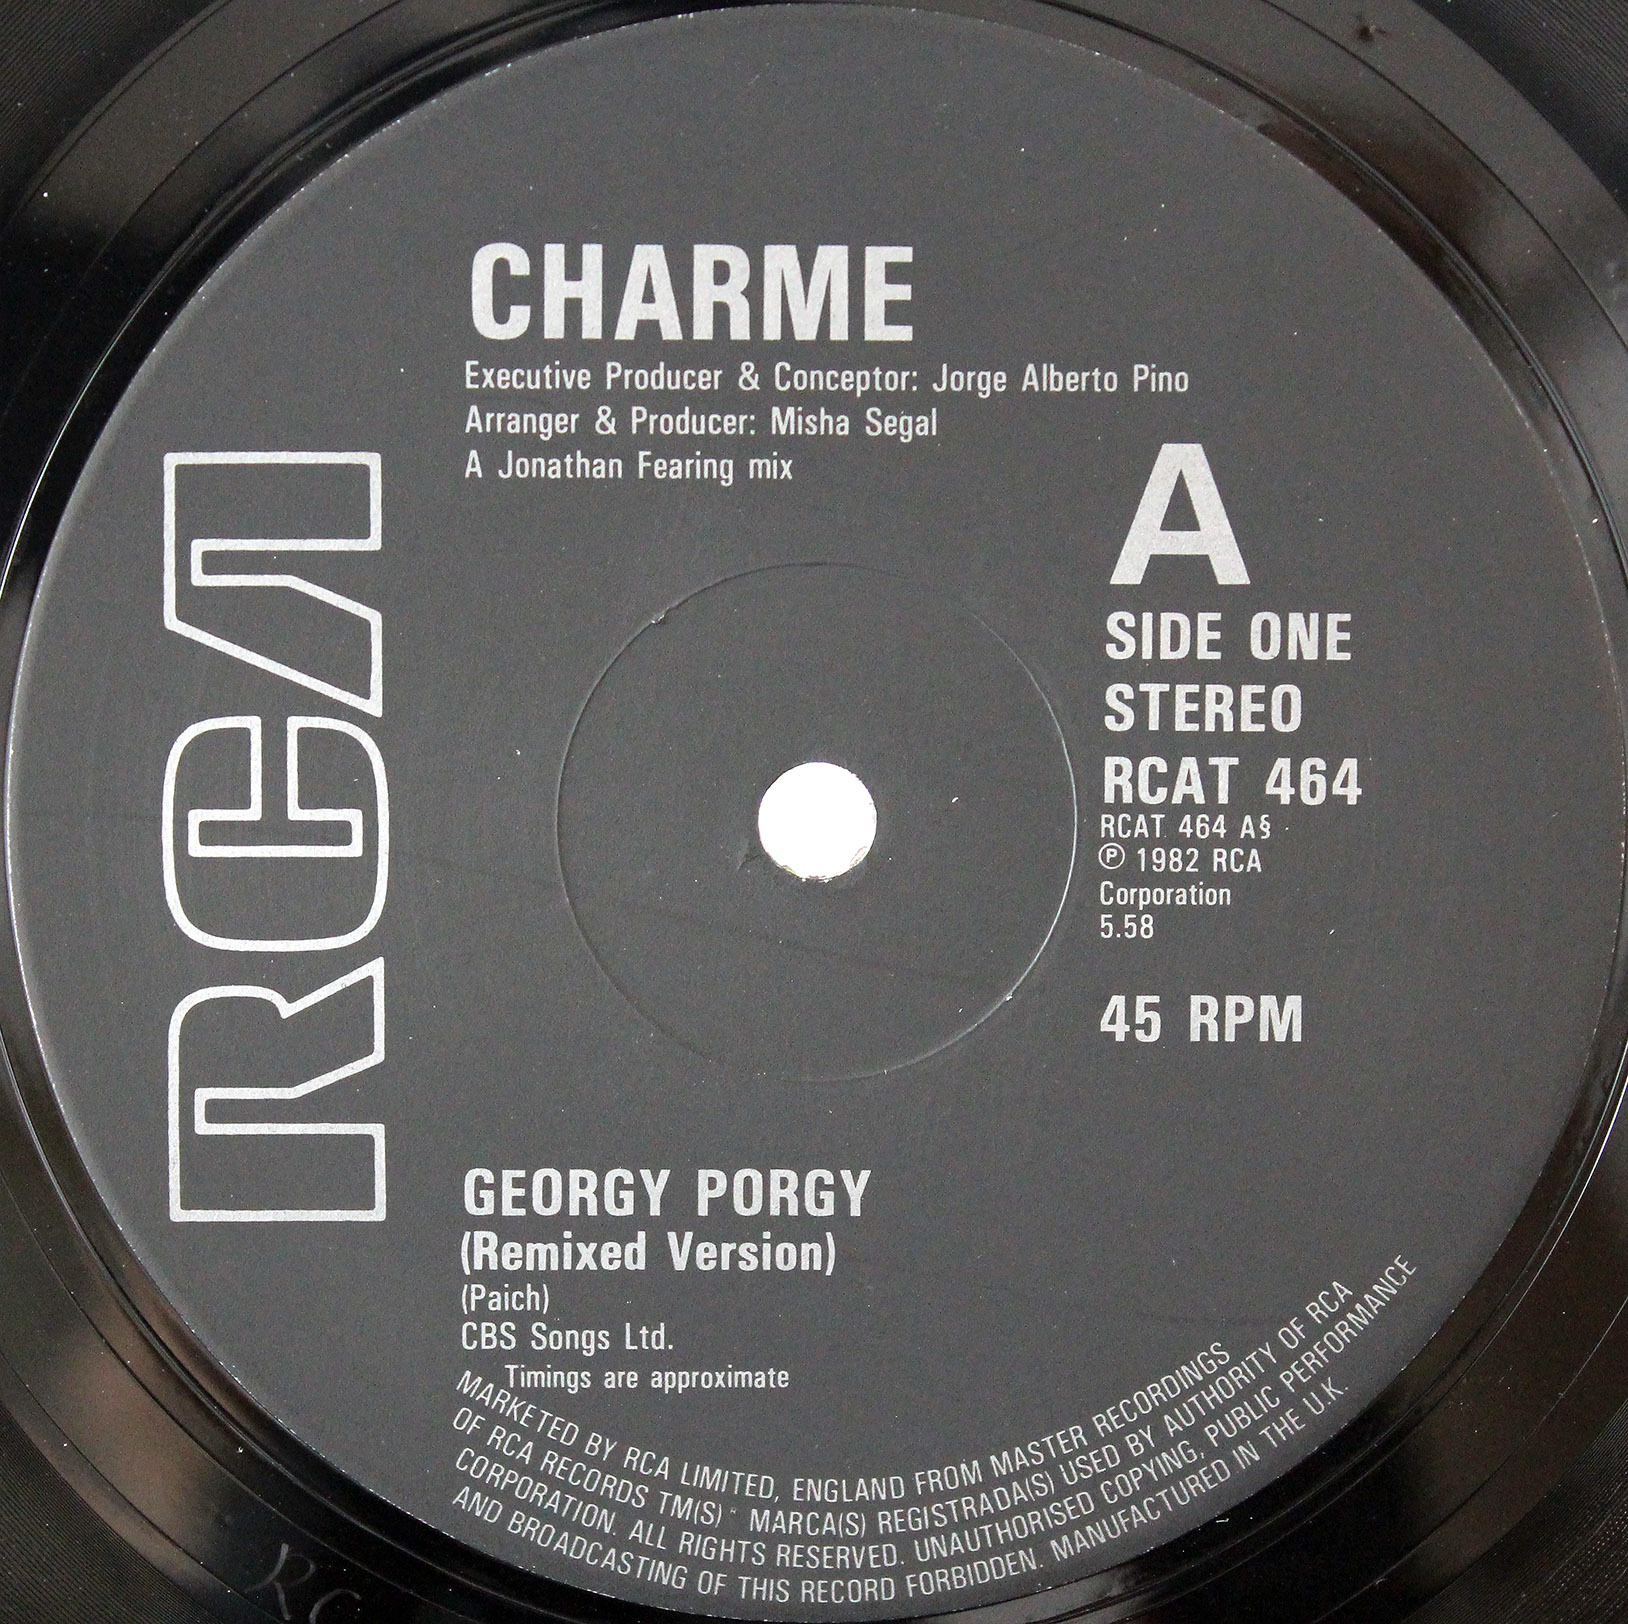 CHARME Feat LUTHER VANDROSS - Georgy Porgy 03